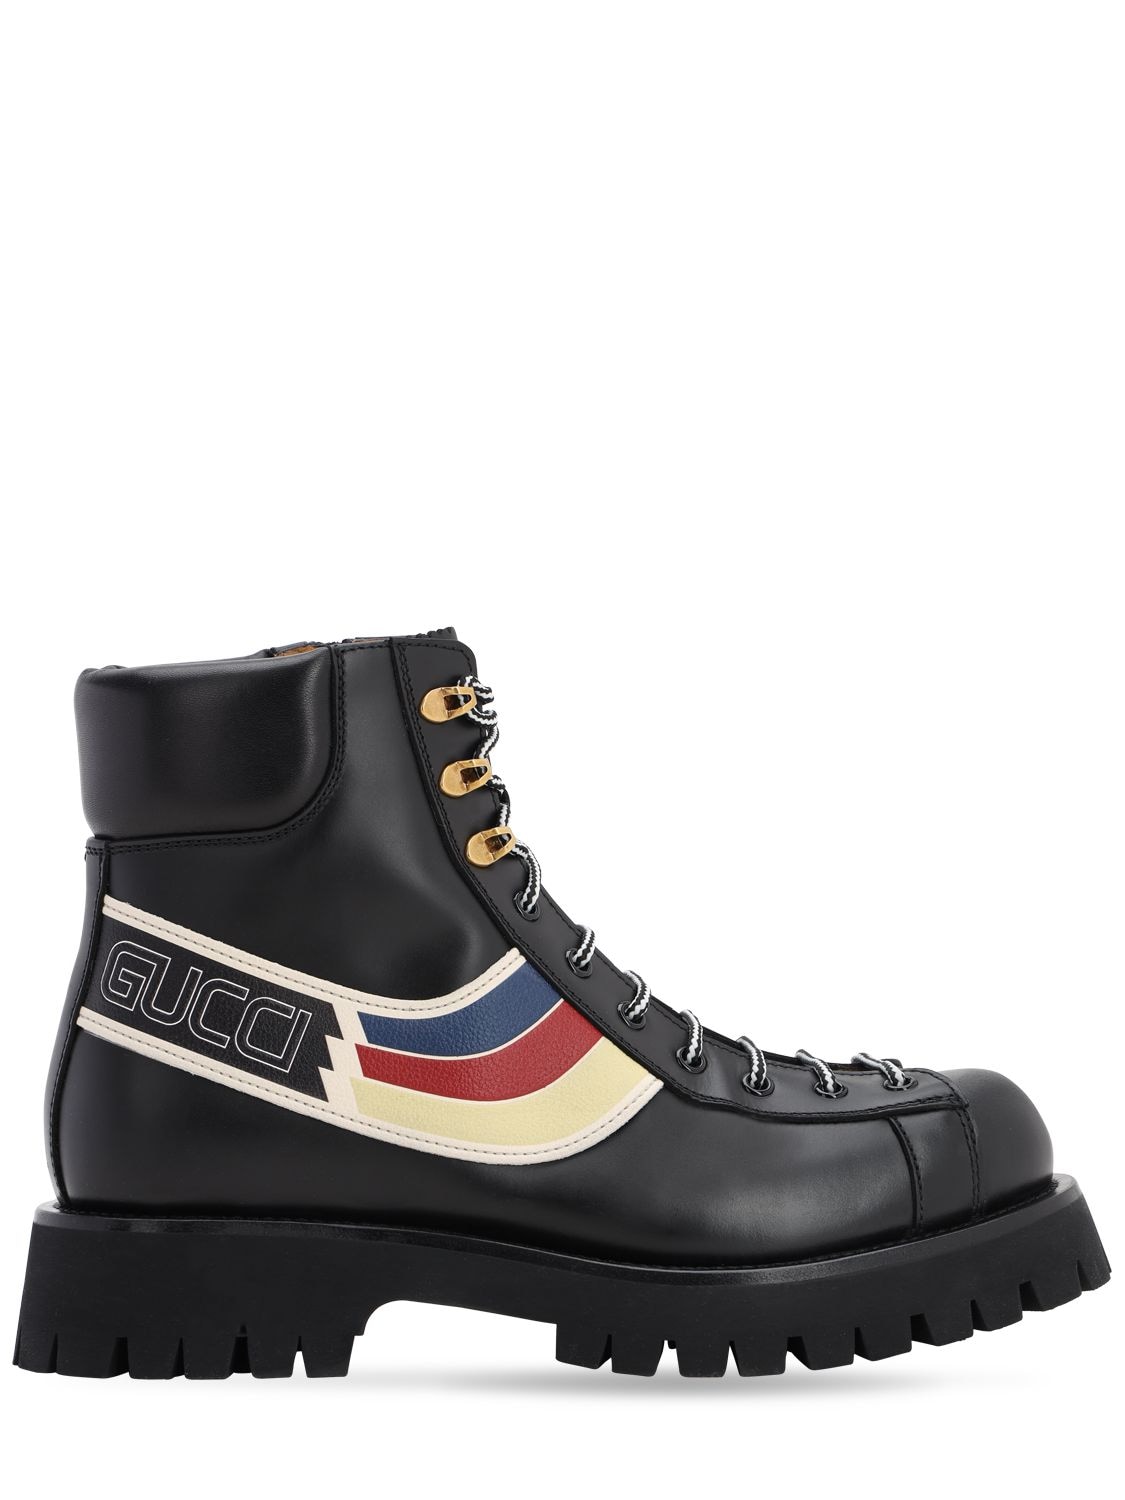 Gucci - 15mm leather lace-up army boots 